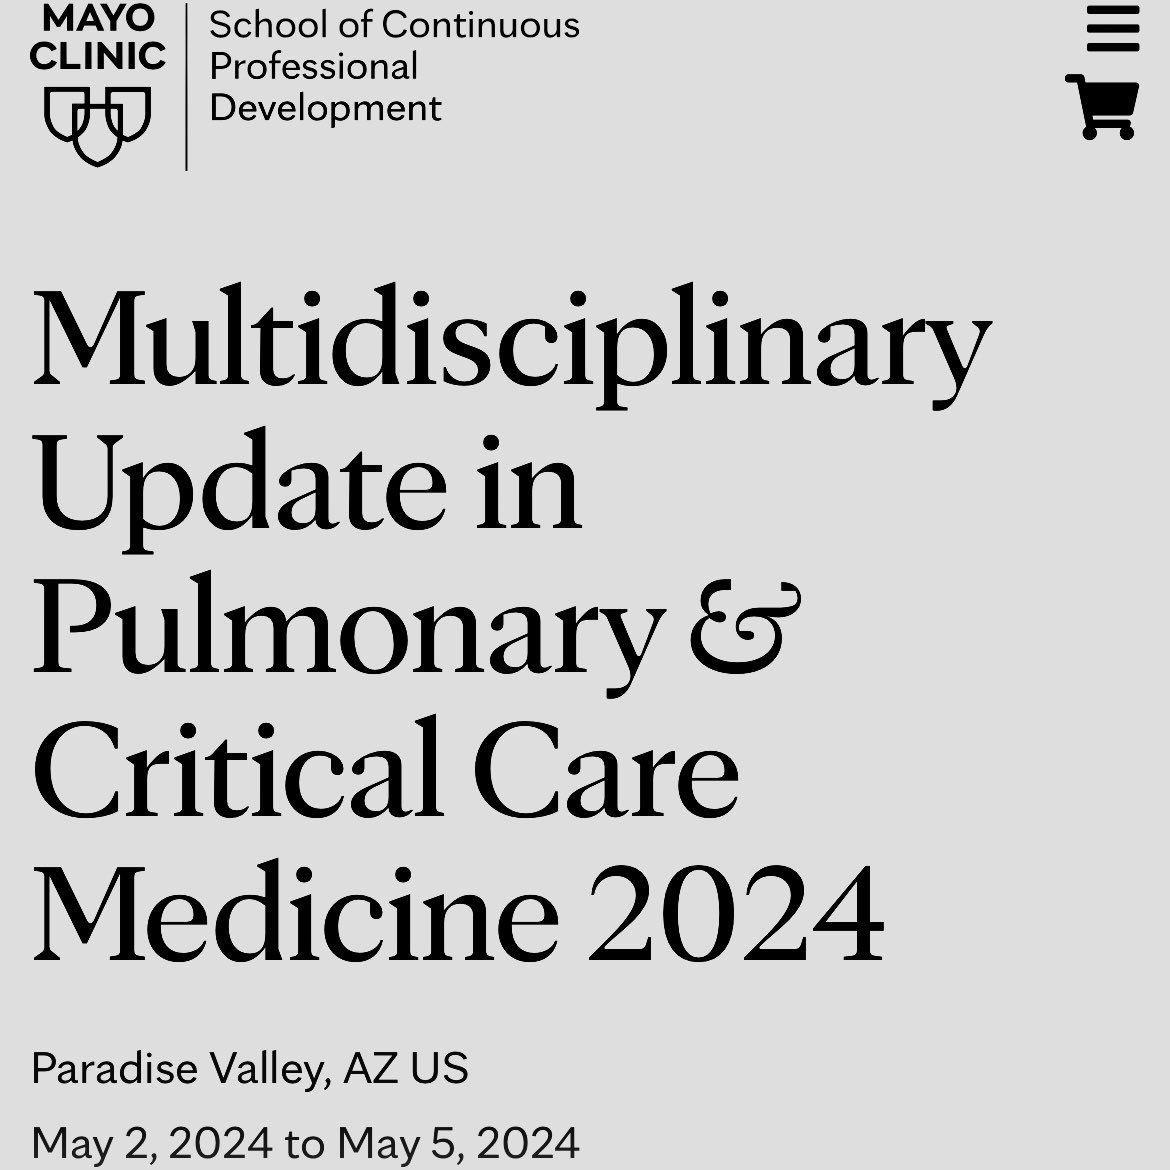 Join @MayoPCCM faculty in Paradise Valley, AZ on May 2-5, 2024. Highlights include clinical updates in PCCM and Sleep Medicine. #MedEd Register here: ce.mayo.edu/pulmonary-medi…